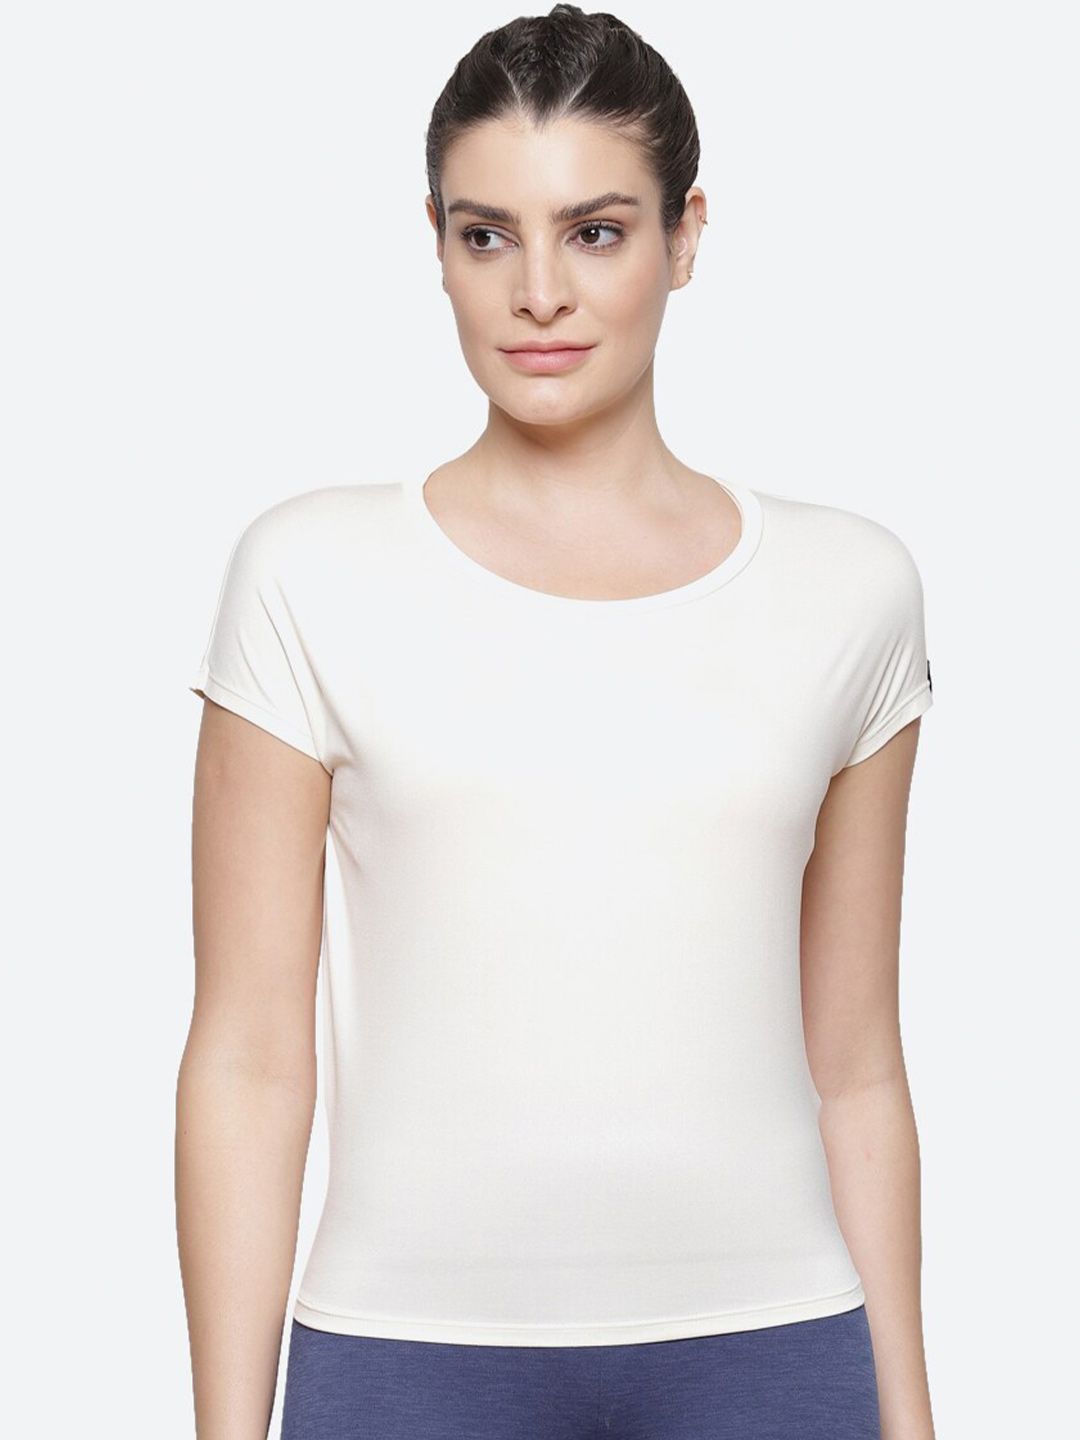 ASICS Women Off White T-shirt W SS Price in India